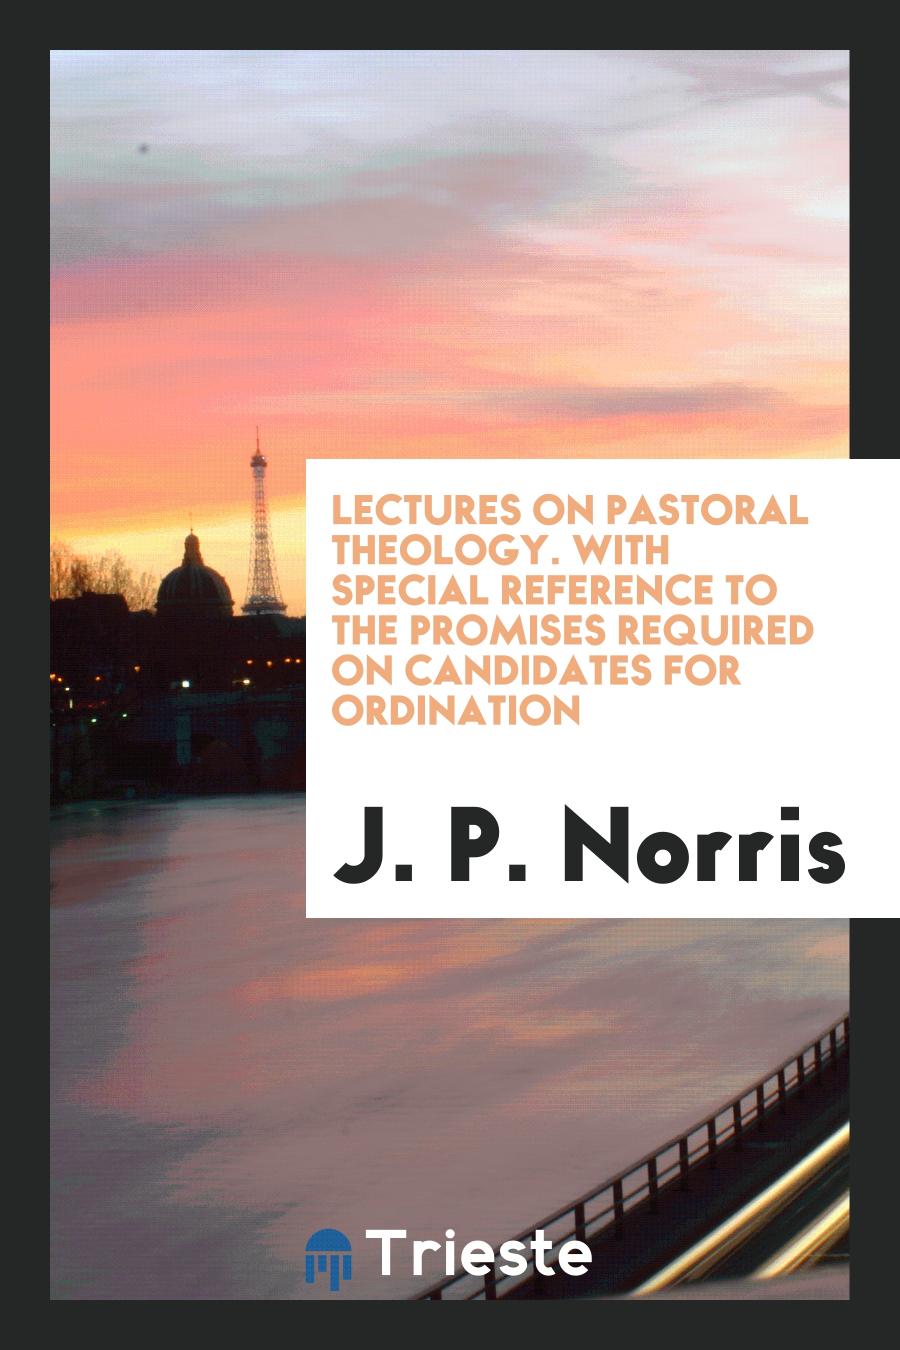 Lectures on Pastoral Theology. With Special Reference to the Promises Required on Candidates for Ordination